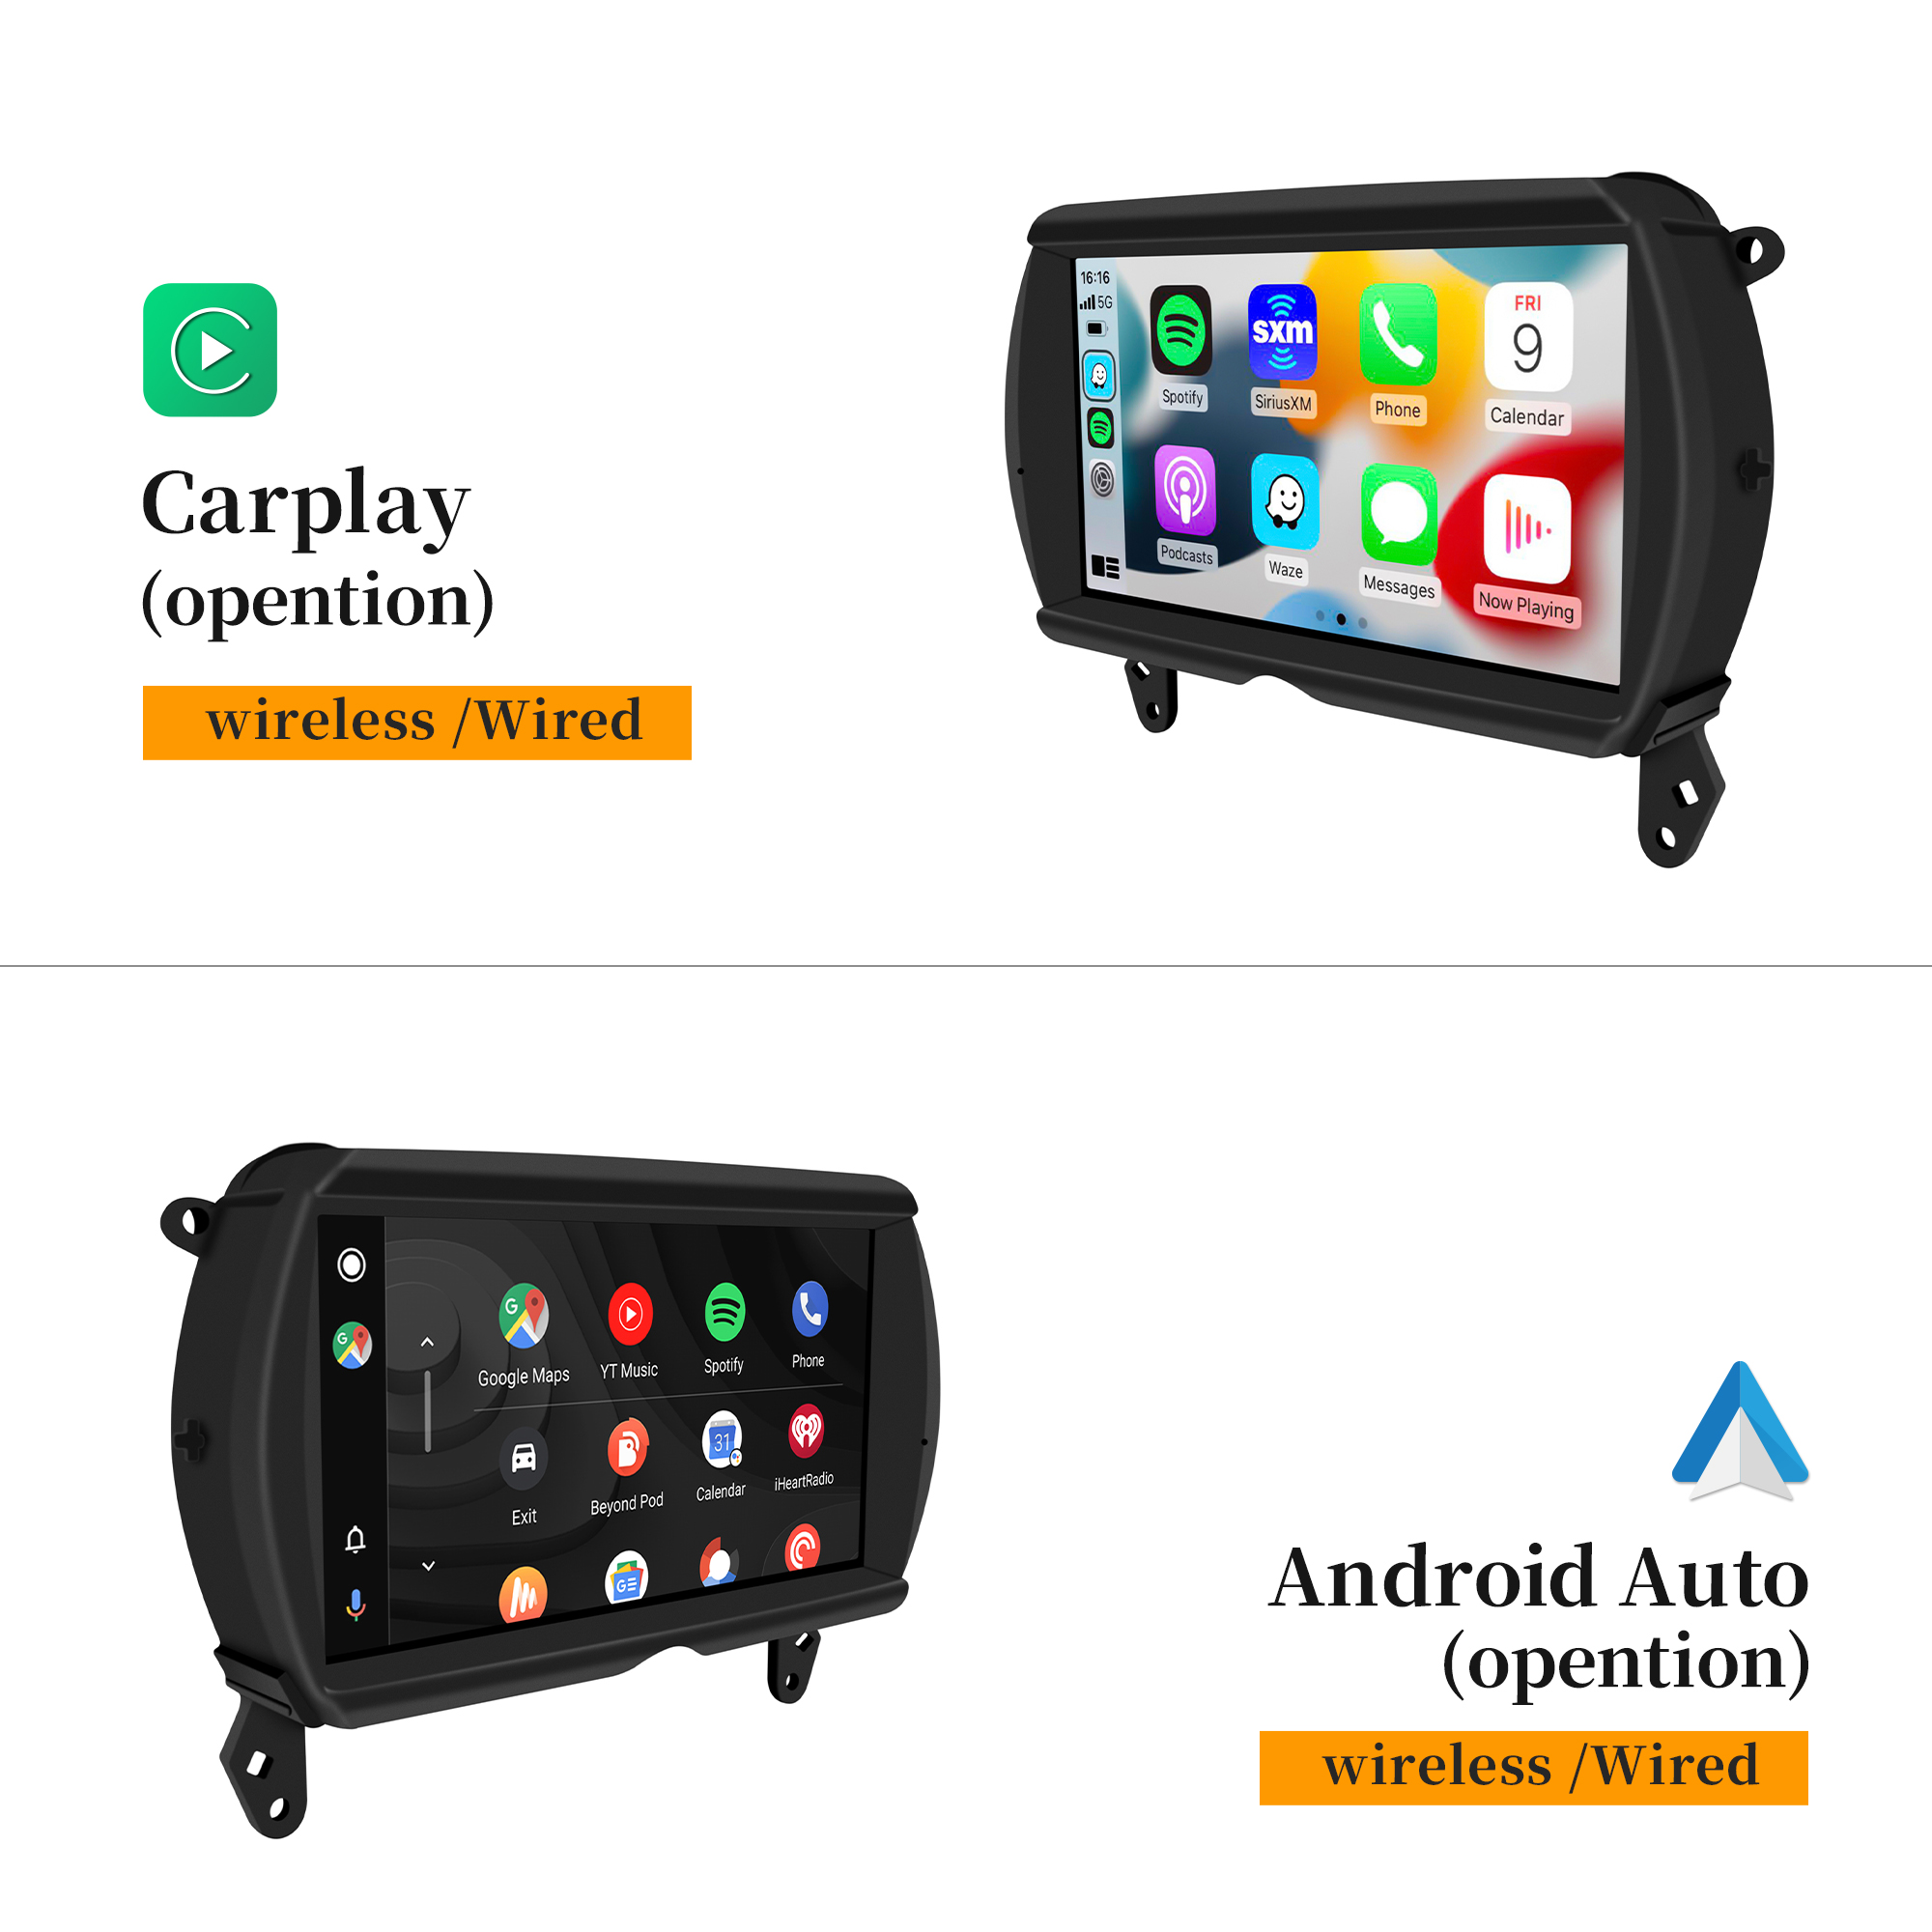 Mini Cooper Head Unit Replacement F54 F55 F56 F57 F60 7 inch Touch Screen Wireless CarPlay Mirroring Android Auto GPS Navigation Android 13